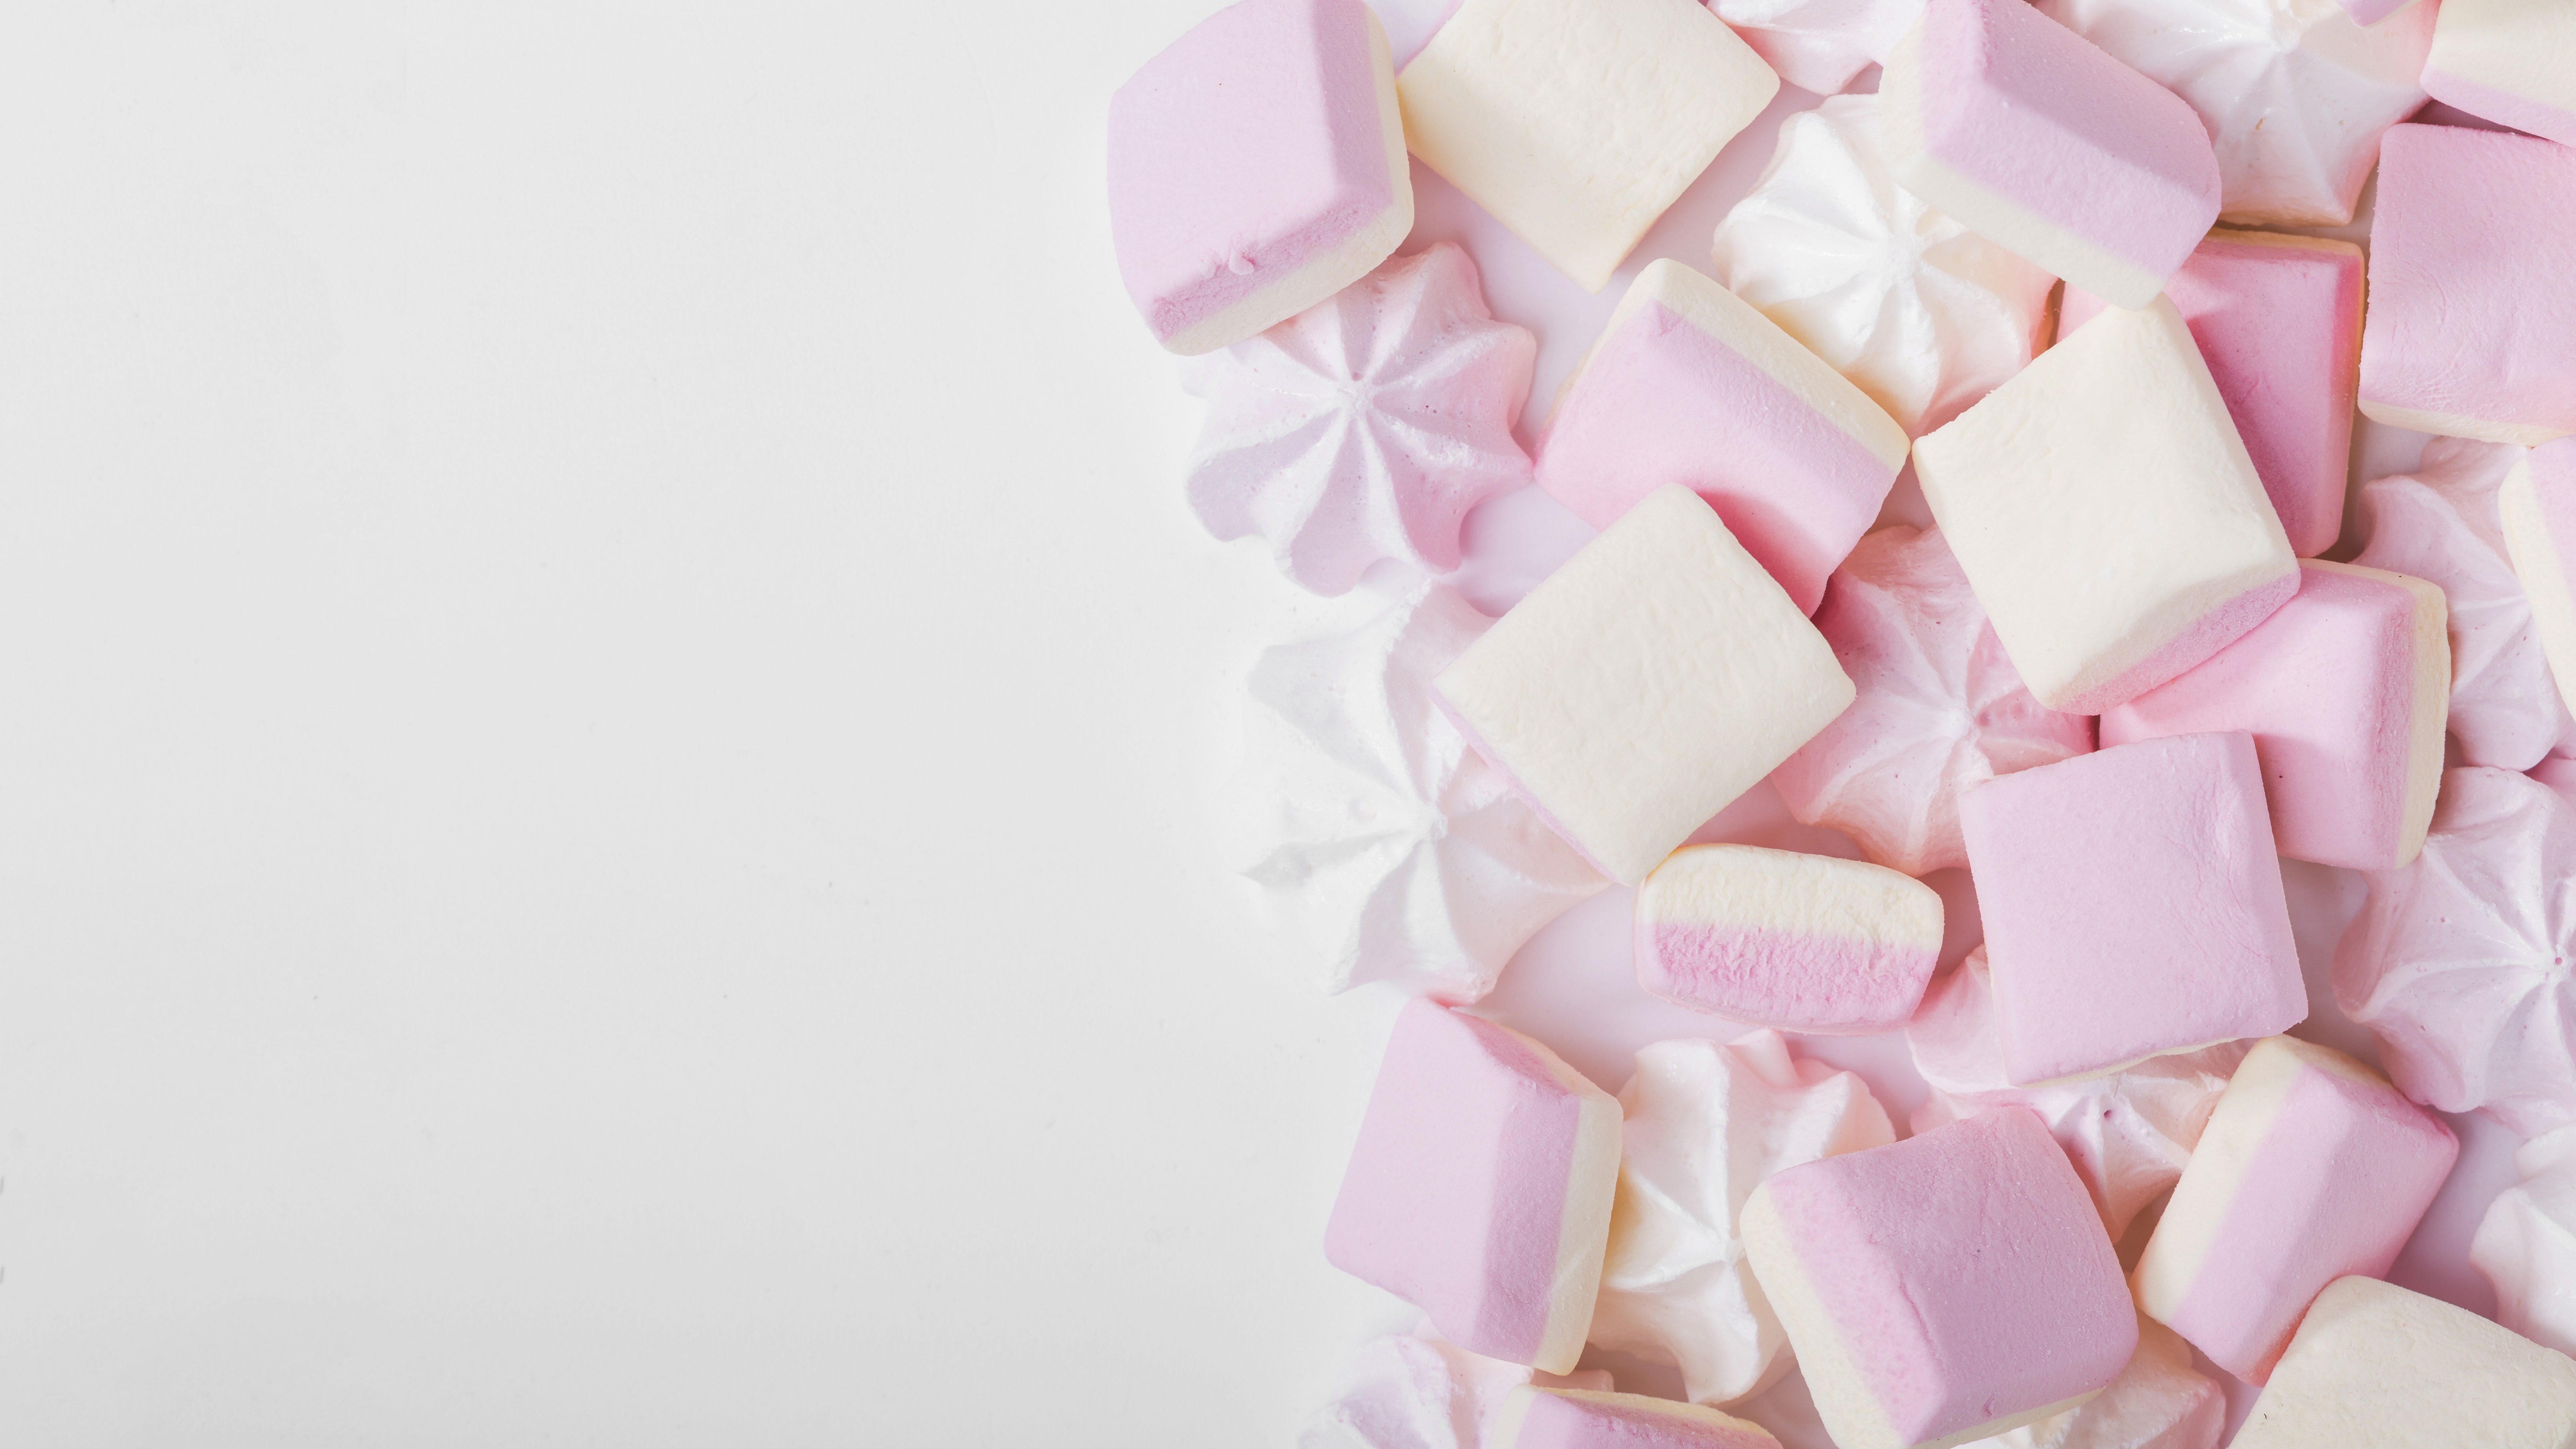 Candy Marshmallow Sweets 6485x3648